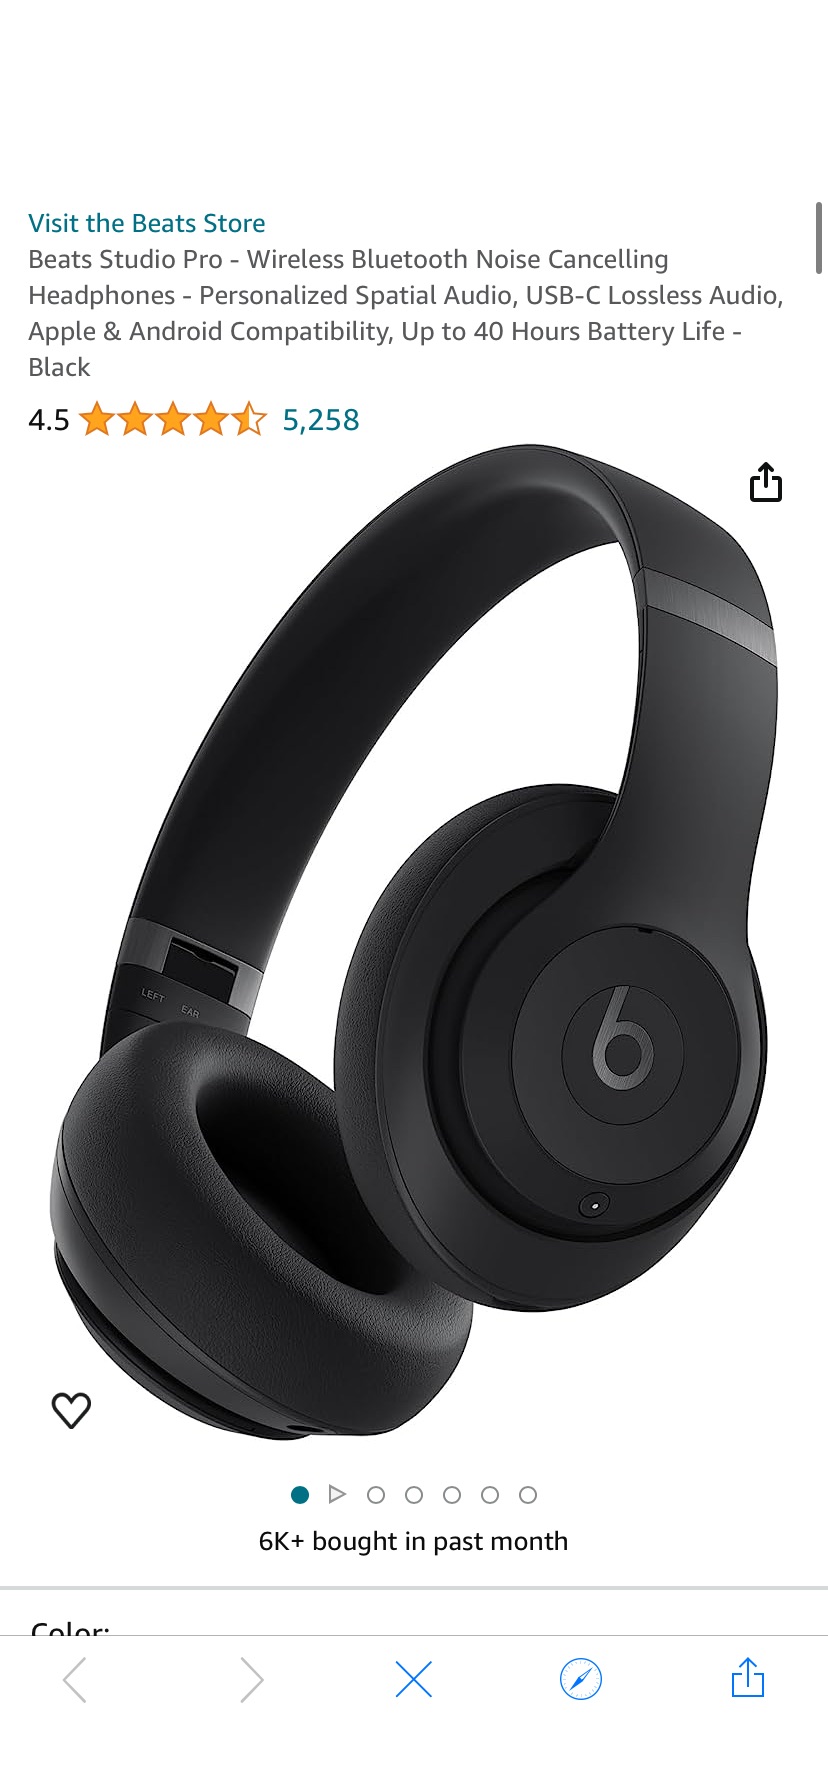 Amazon.com: Beats Studio Pro - Wireless Bluetooth Noise Cancelling Headphones - Personalized Spatial Audio, USB-C Lossless Audio, Apple & Android Compatibility, Up to 40 Hours Battery Life - Black : E